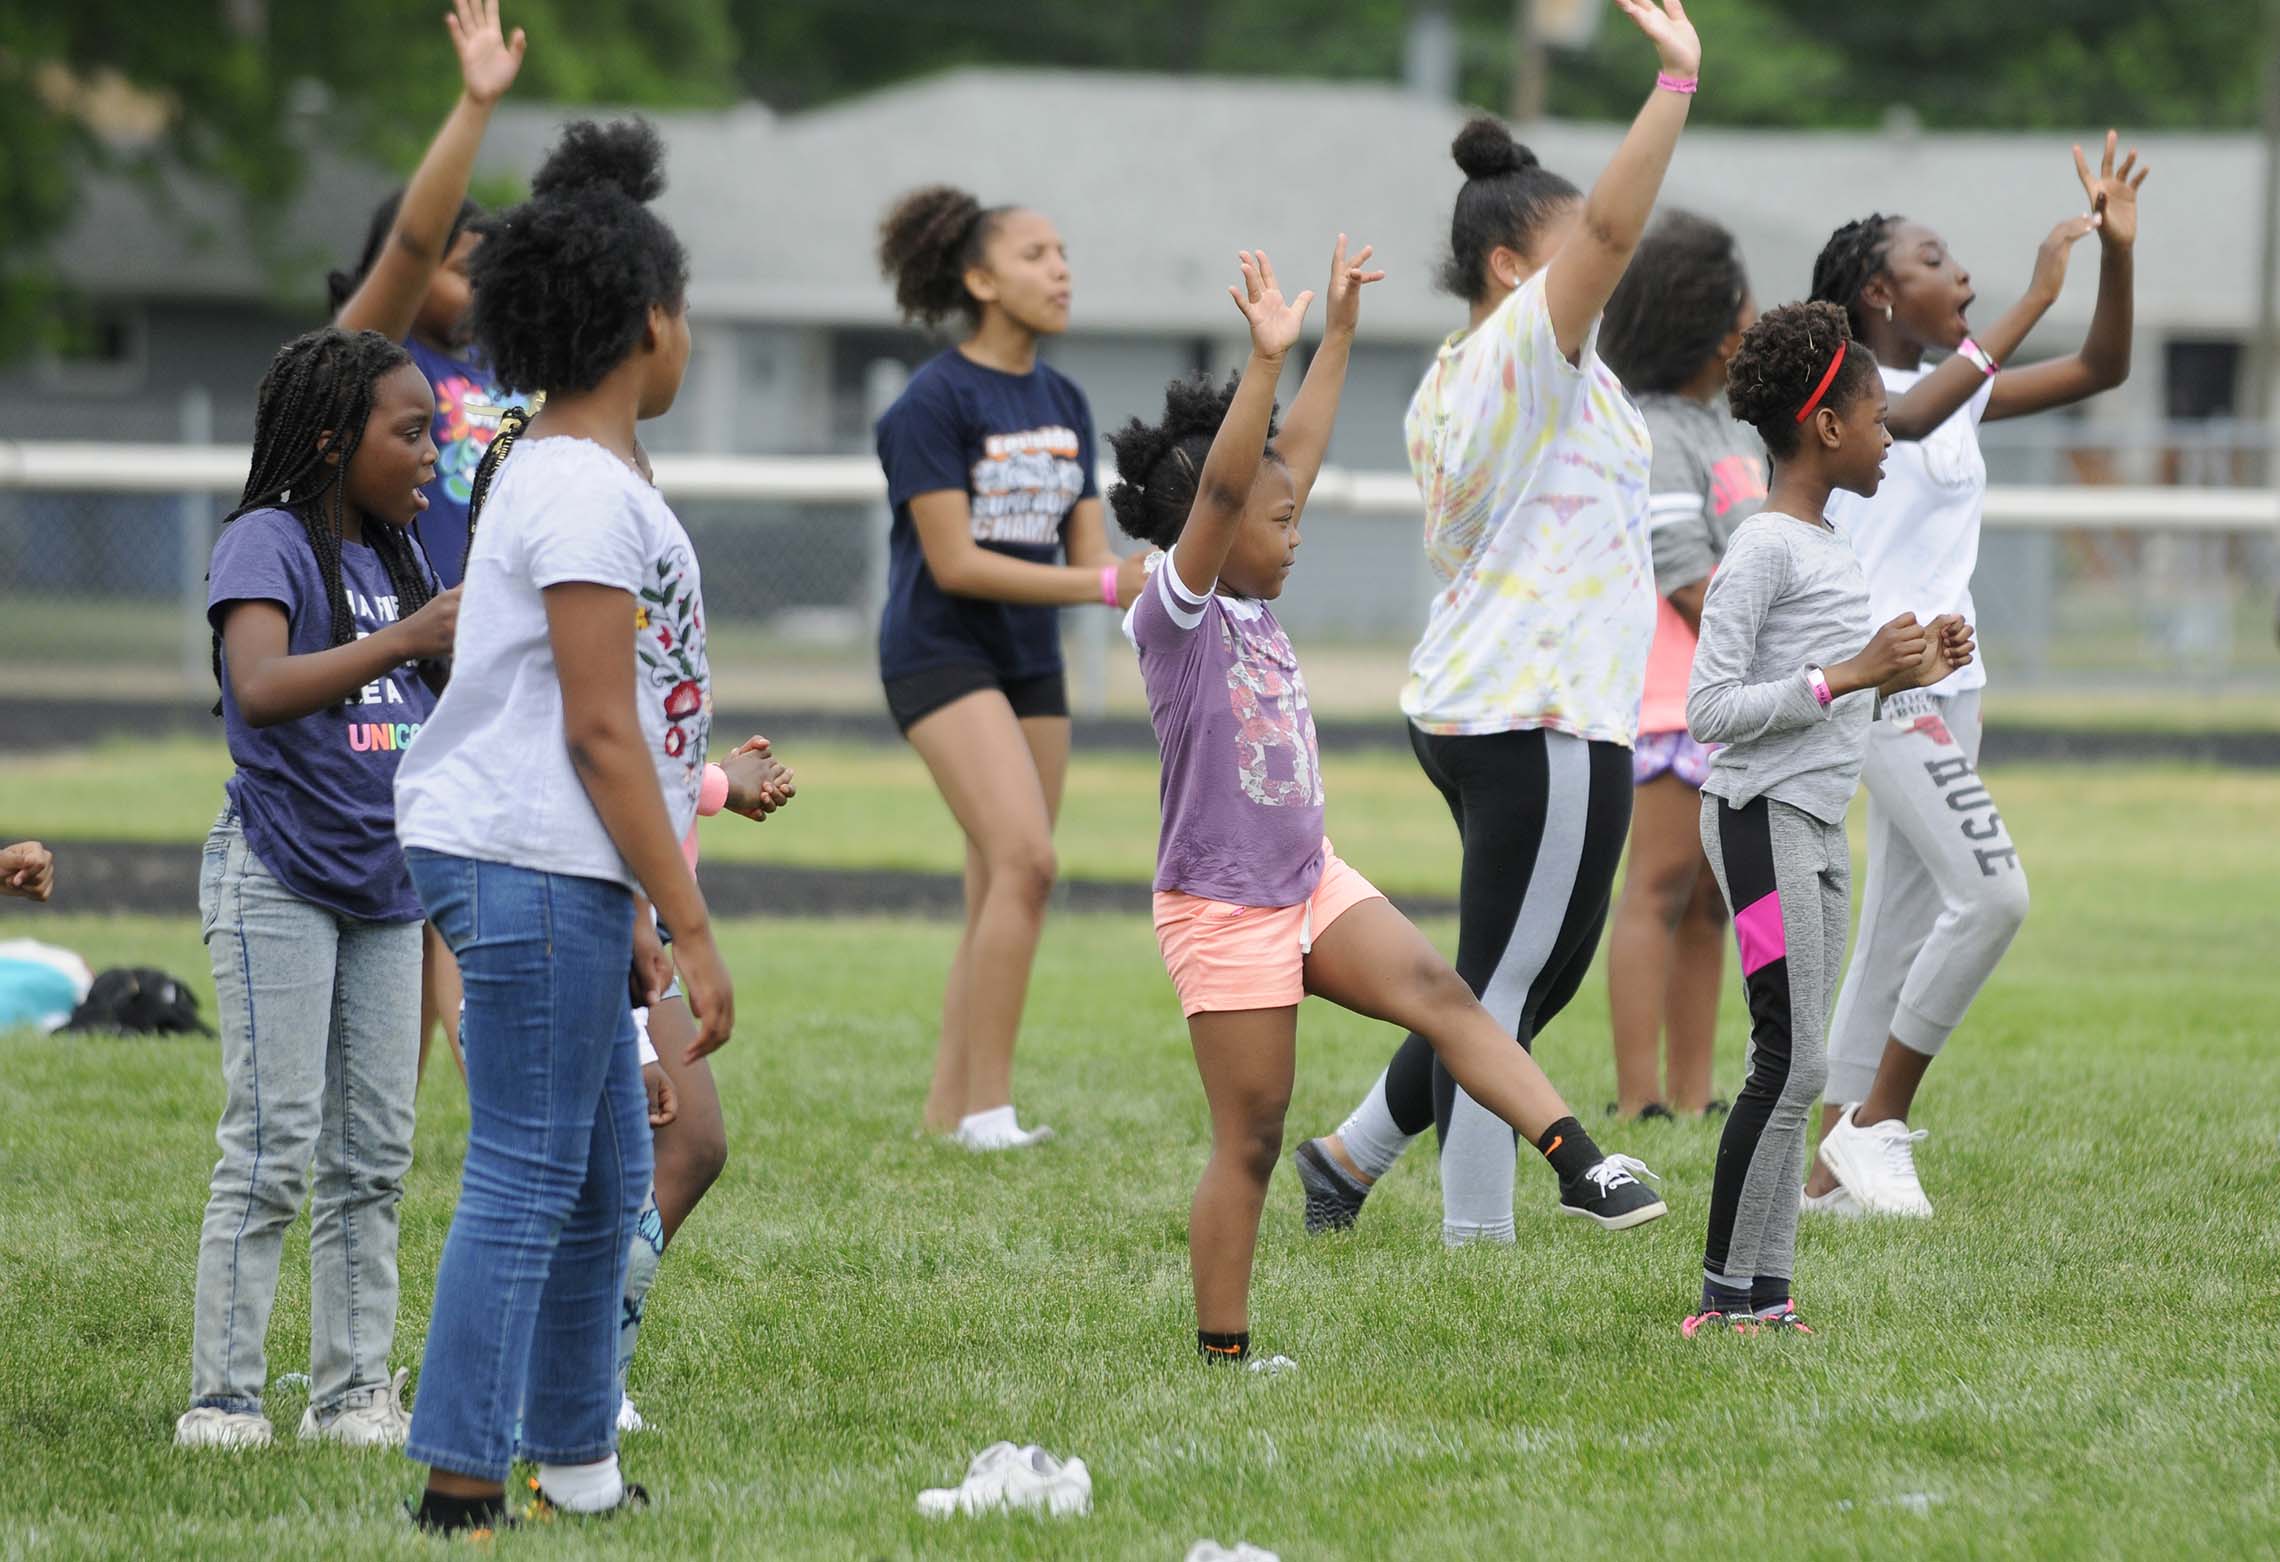  Participants in Haglers 12th Annual Kidz-Kan-Do Football and Cheerleading Camp practice a cheer routine Saturday on the football field at Bishop McNamara High School in Kankakee. The kids where taught various cheerleading skills throughout the day a